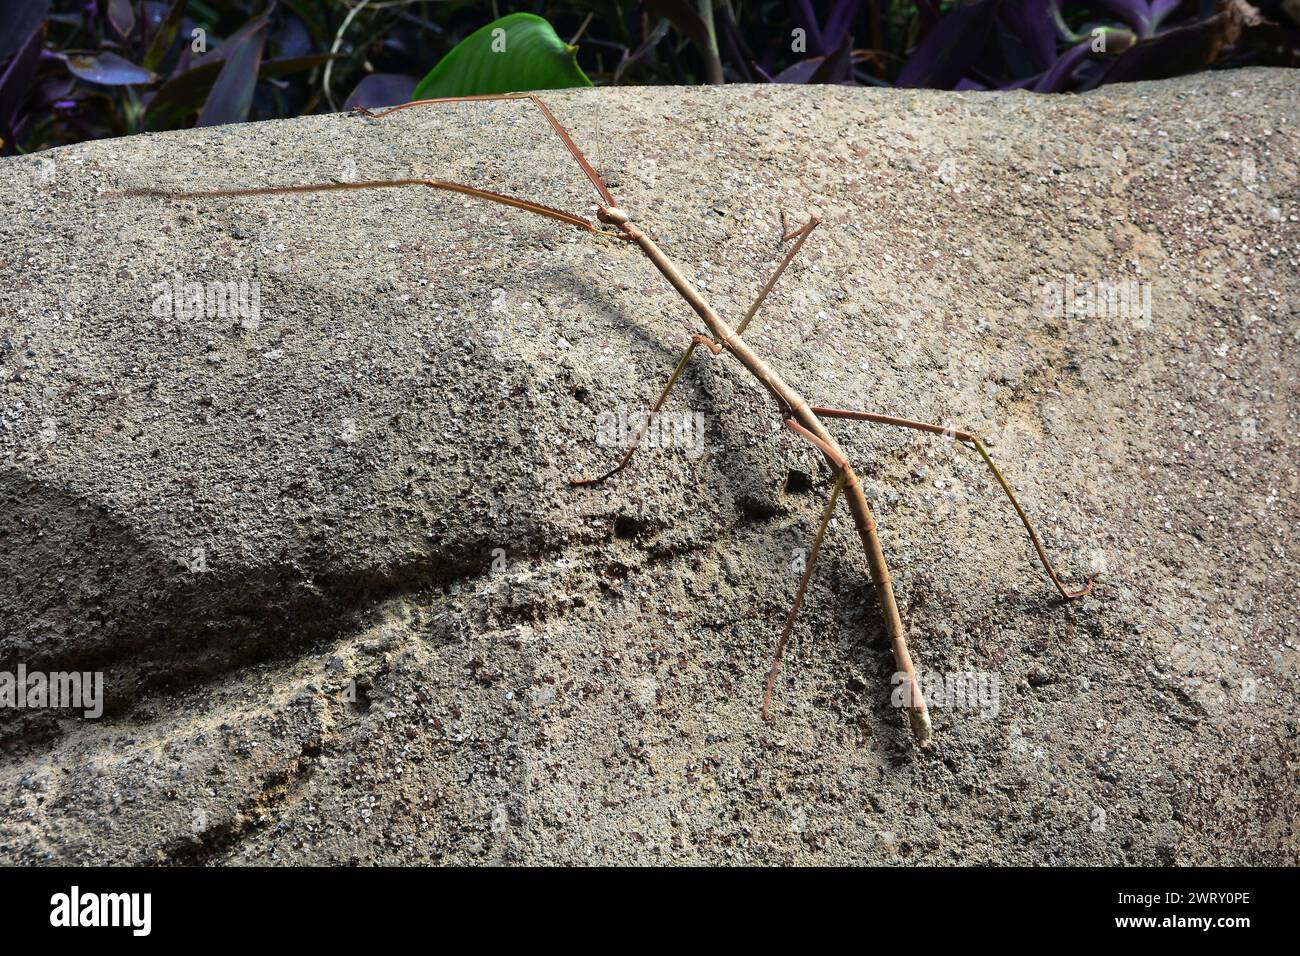 Walking stick bug in the gardens Stock Photo